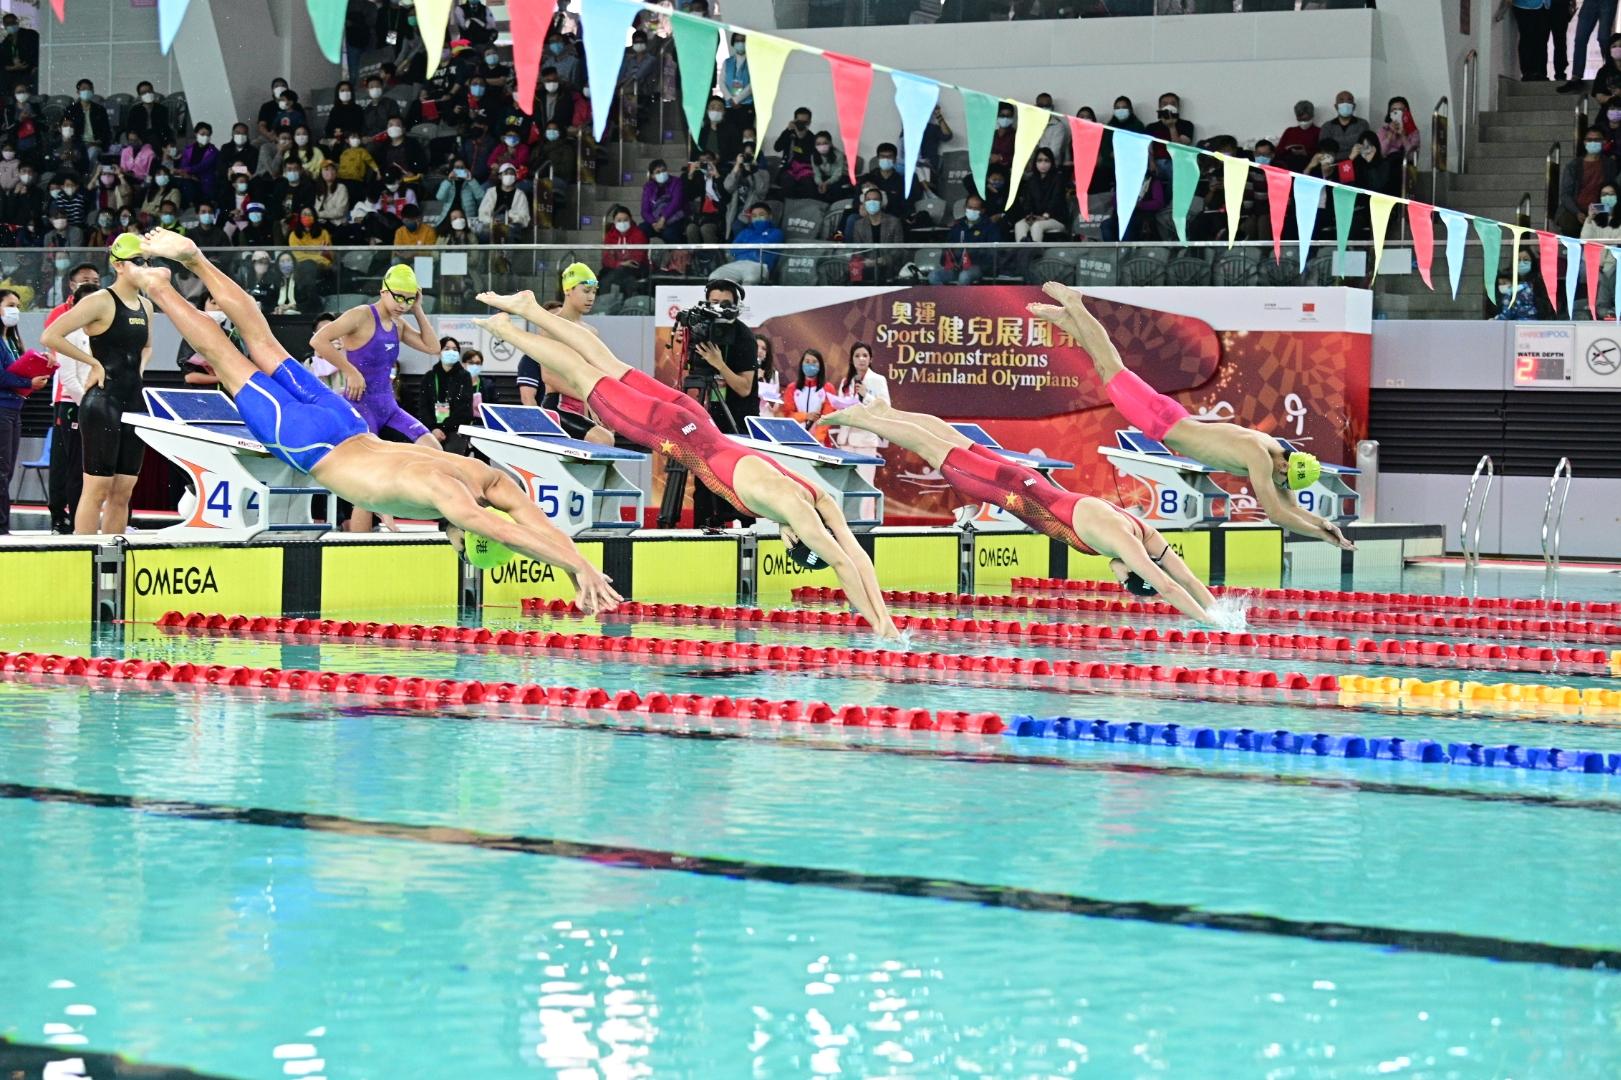 The delegation of Tokyo 2020 Olympic Games Mainland Olympians attended the sports demonstrations at Victoria Park Swimming Pool this morning (December 4). Photo shows Mainland swimming athletes and Hong Kong swimming athletes performing relay in teams.